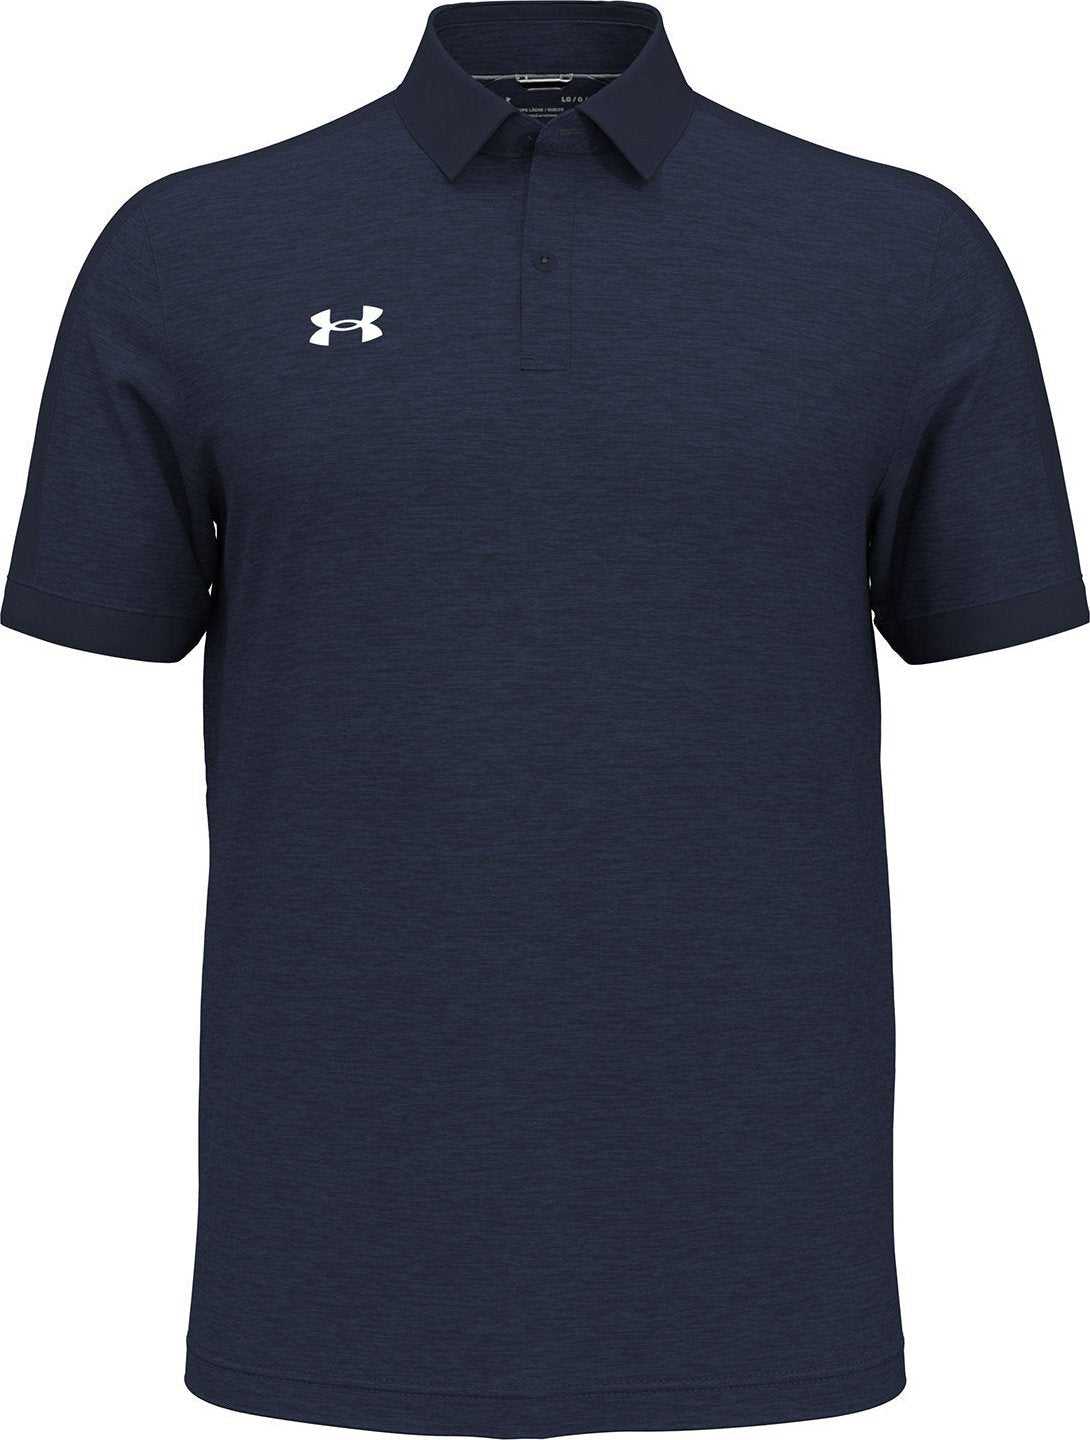 Under Armour 1376907 Mens Trophy Level Polo - Midnight Navy White